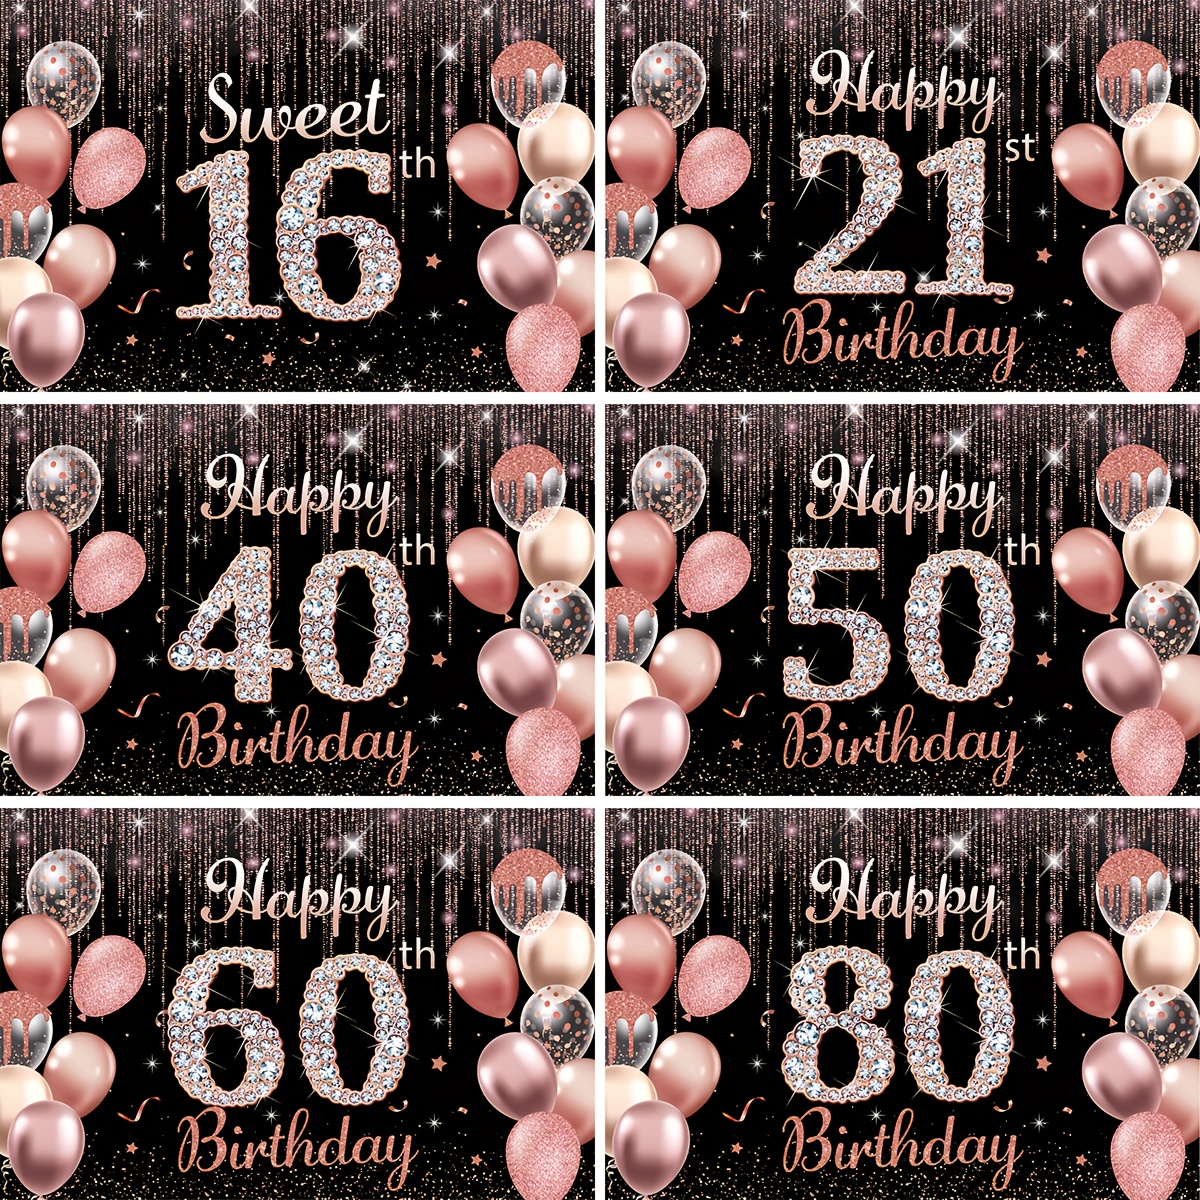 Birthday Decoration Service - Any Number - Birthday balloon decoration -  1st, 2nd, 16th, 21st, 30th, 60th